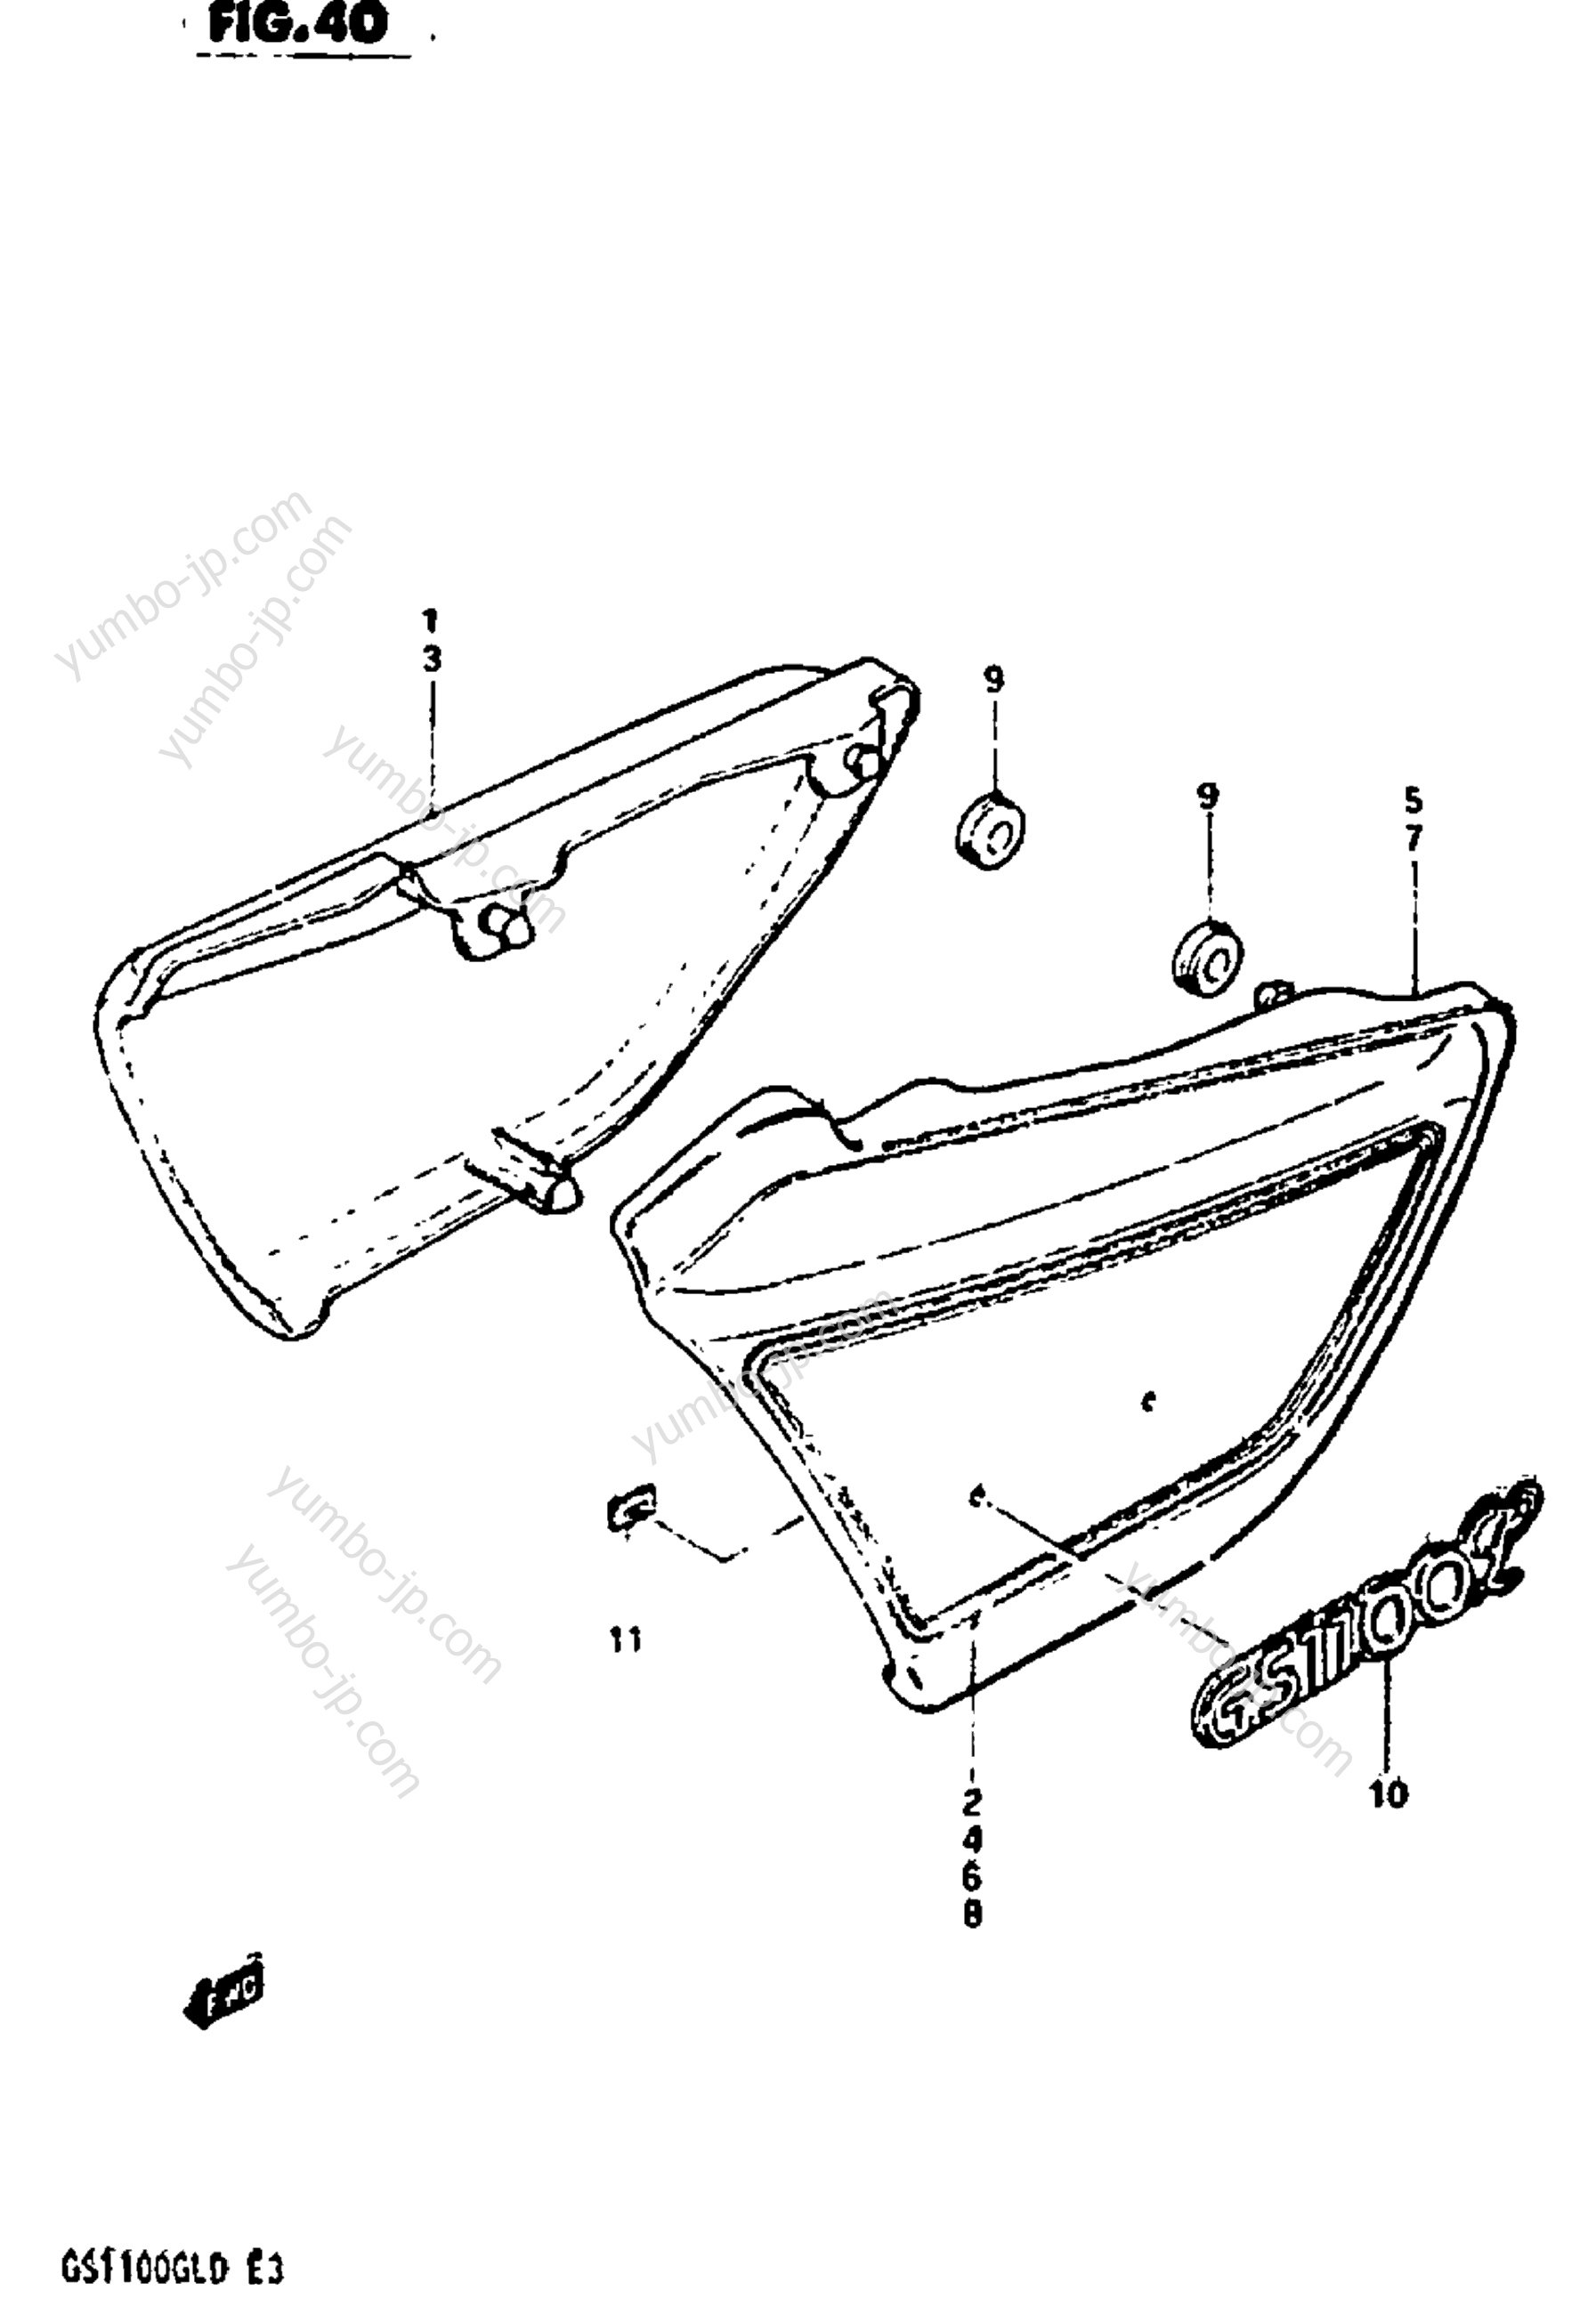 FRAME COVER (MODEL Z) for motorcycles SUZUKI GS1100GL 1983 year